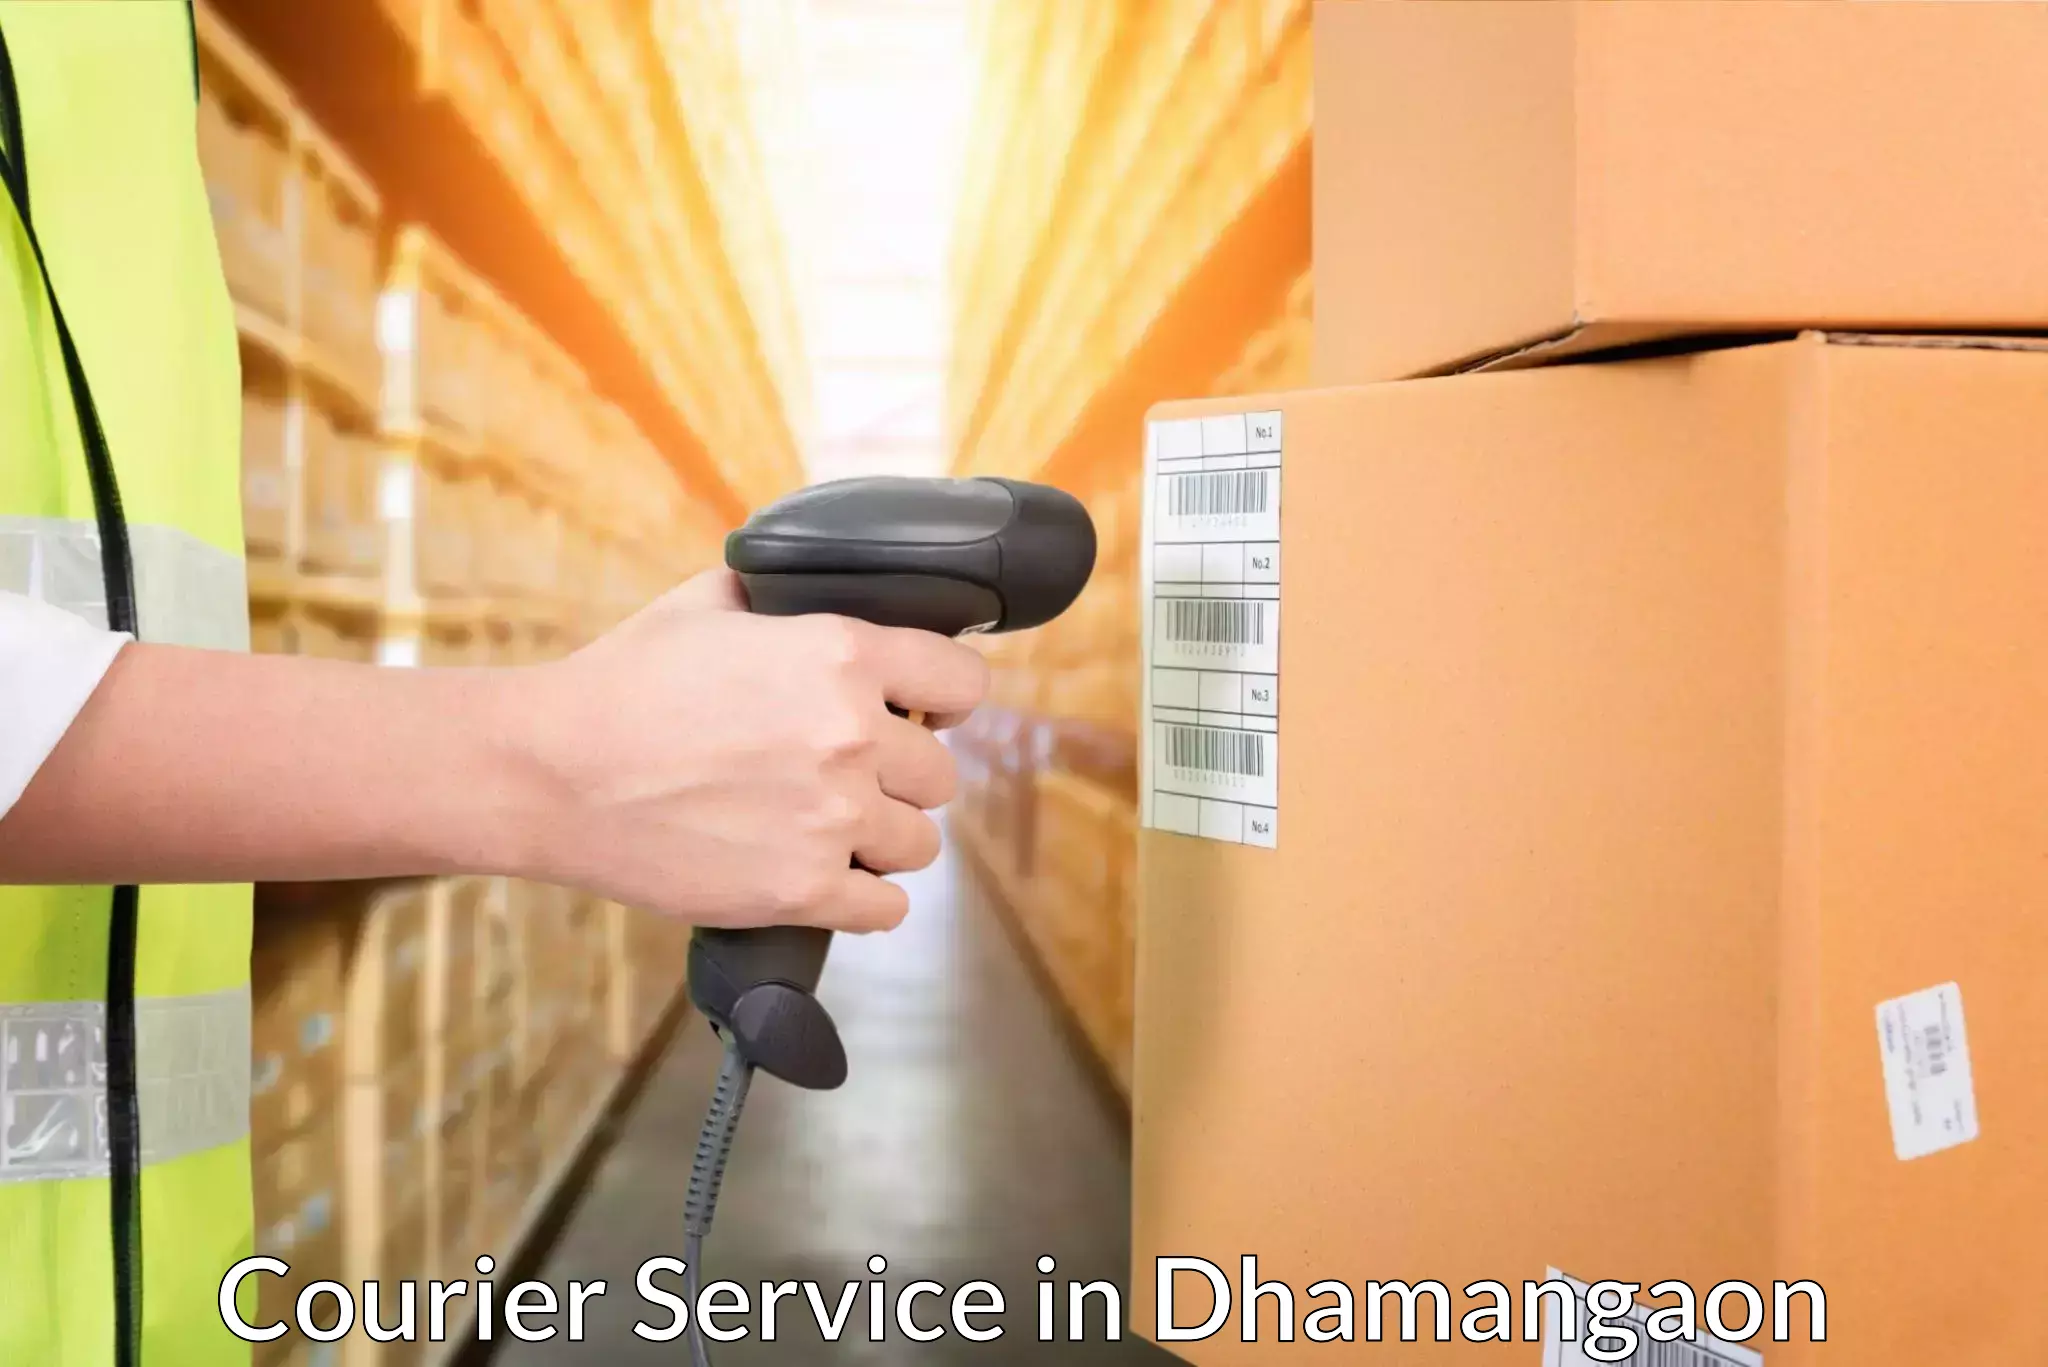 Quick dispatch service in Dhamangaon